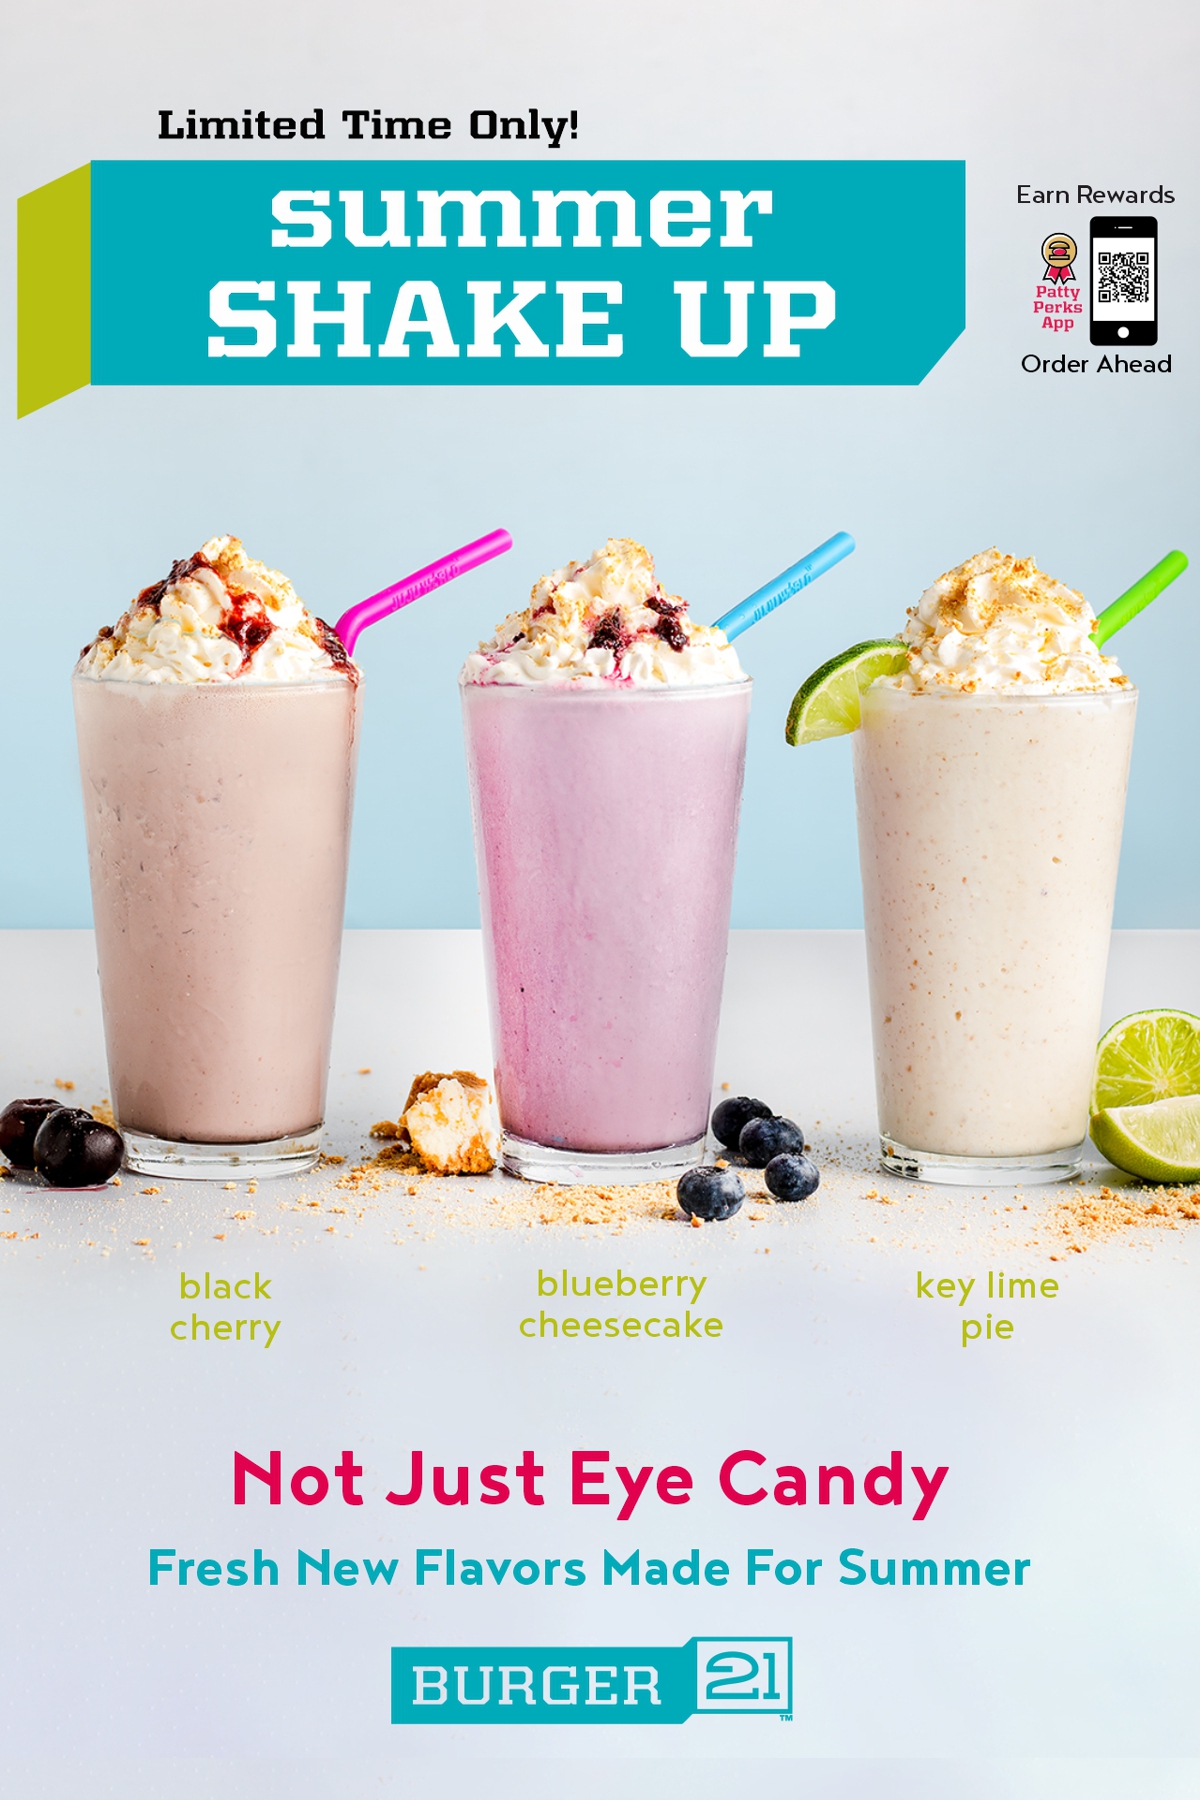 Fresh Summer Shake Flavors to Shake Up Your Summer Blueberry Cheesecake                      Black Cherry Key Lime Pie